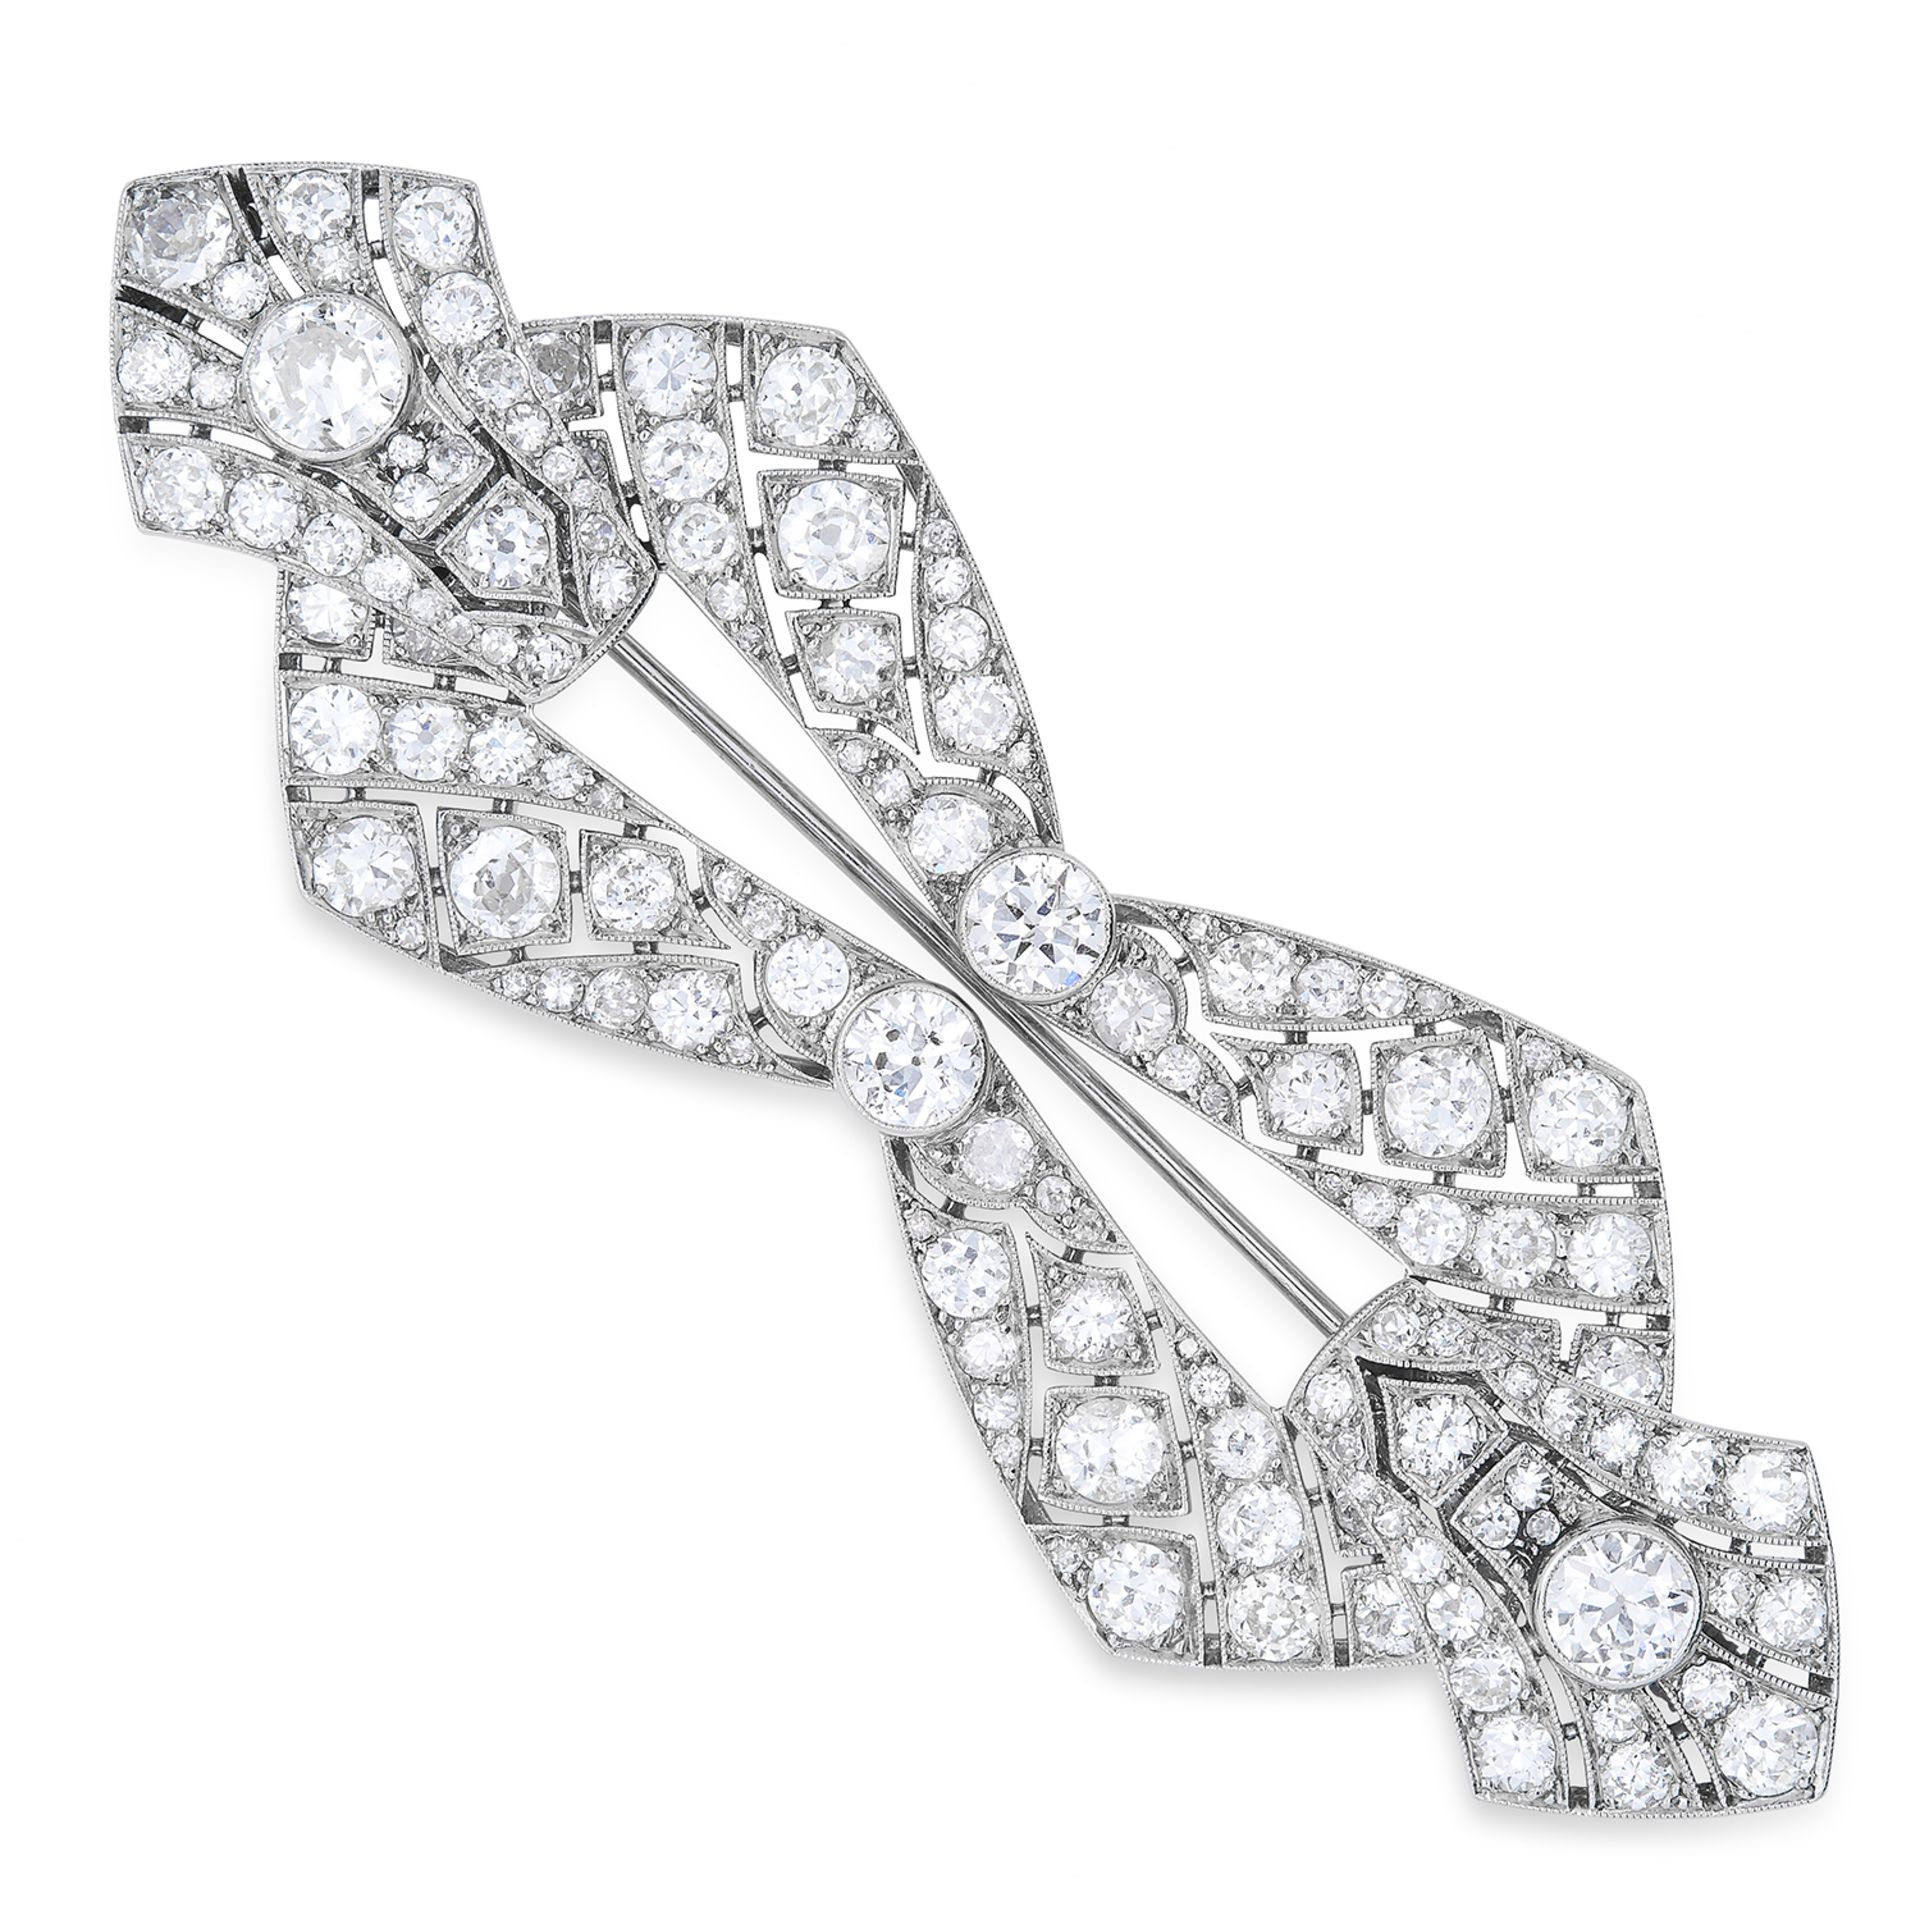 INTERCHANGEABLE DIAMOND BROOCH in Art Deco design, set with round cut diamonds, on articulated - Image 2 of 2